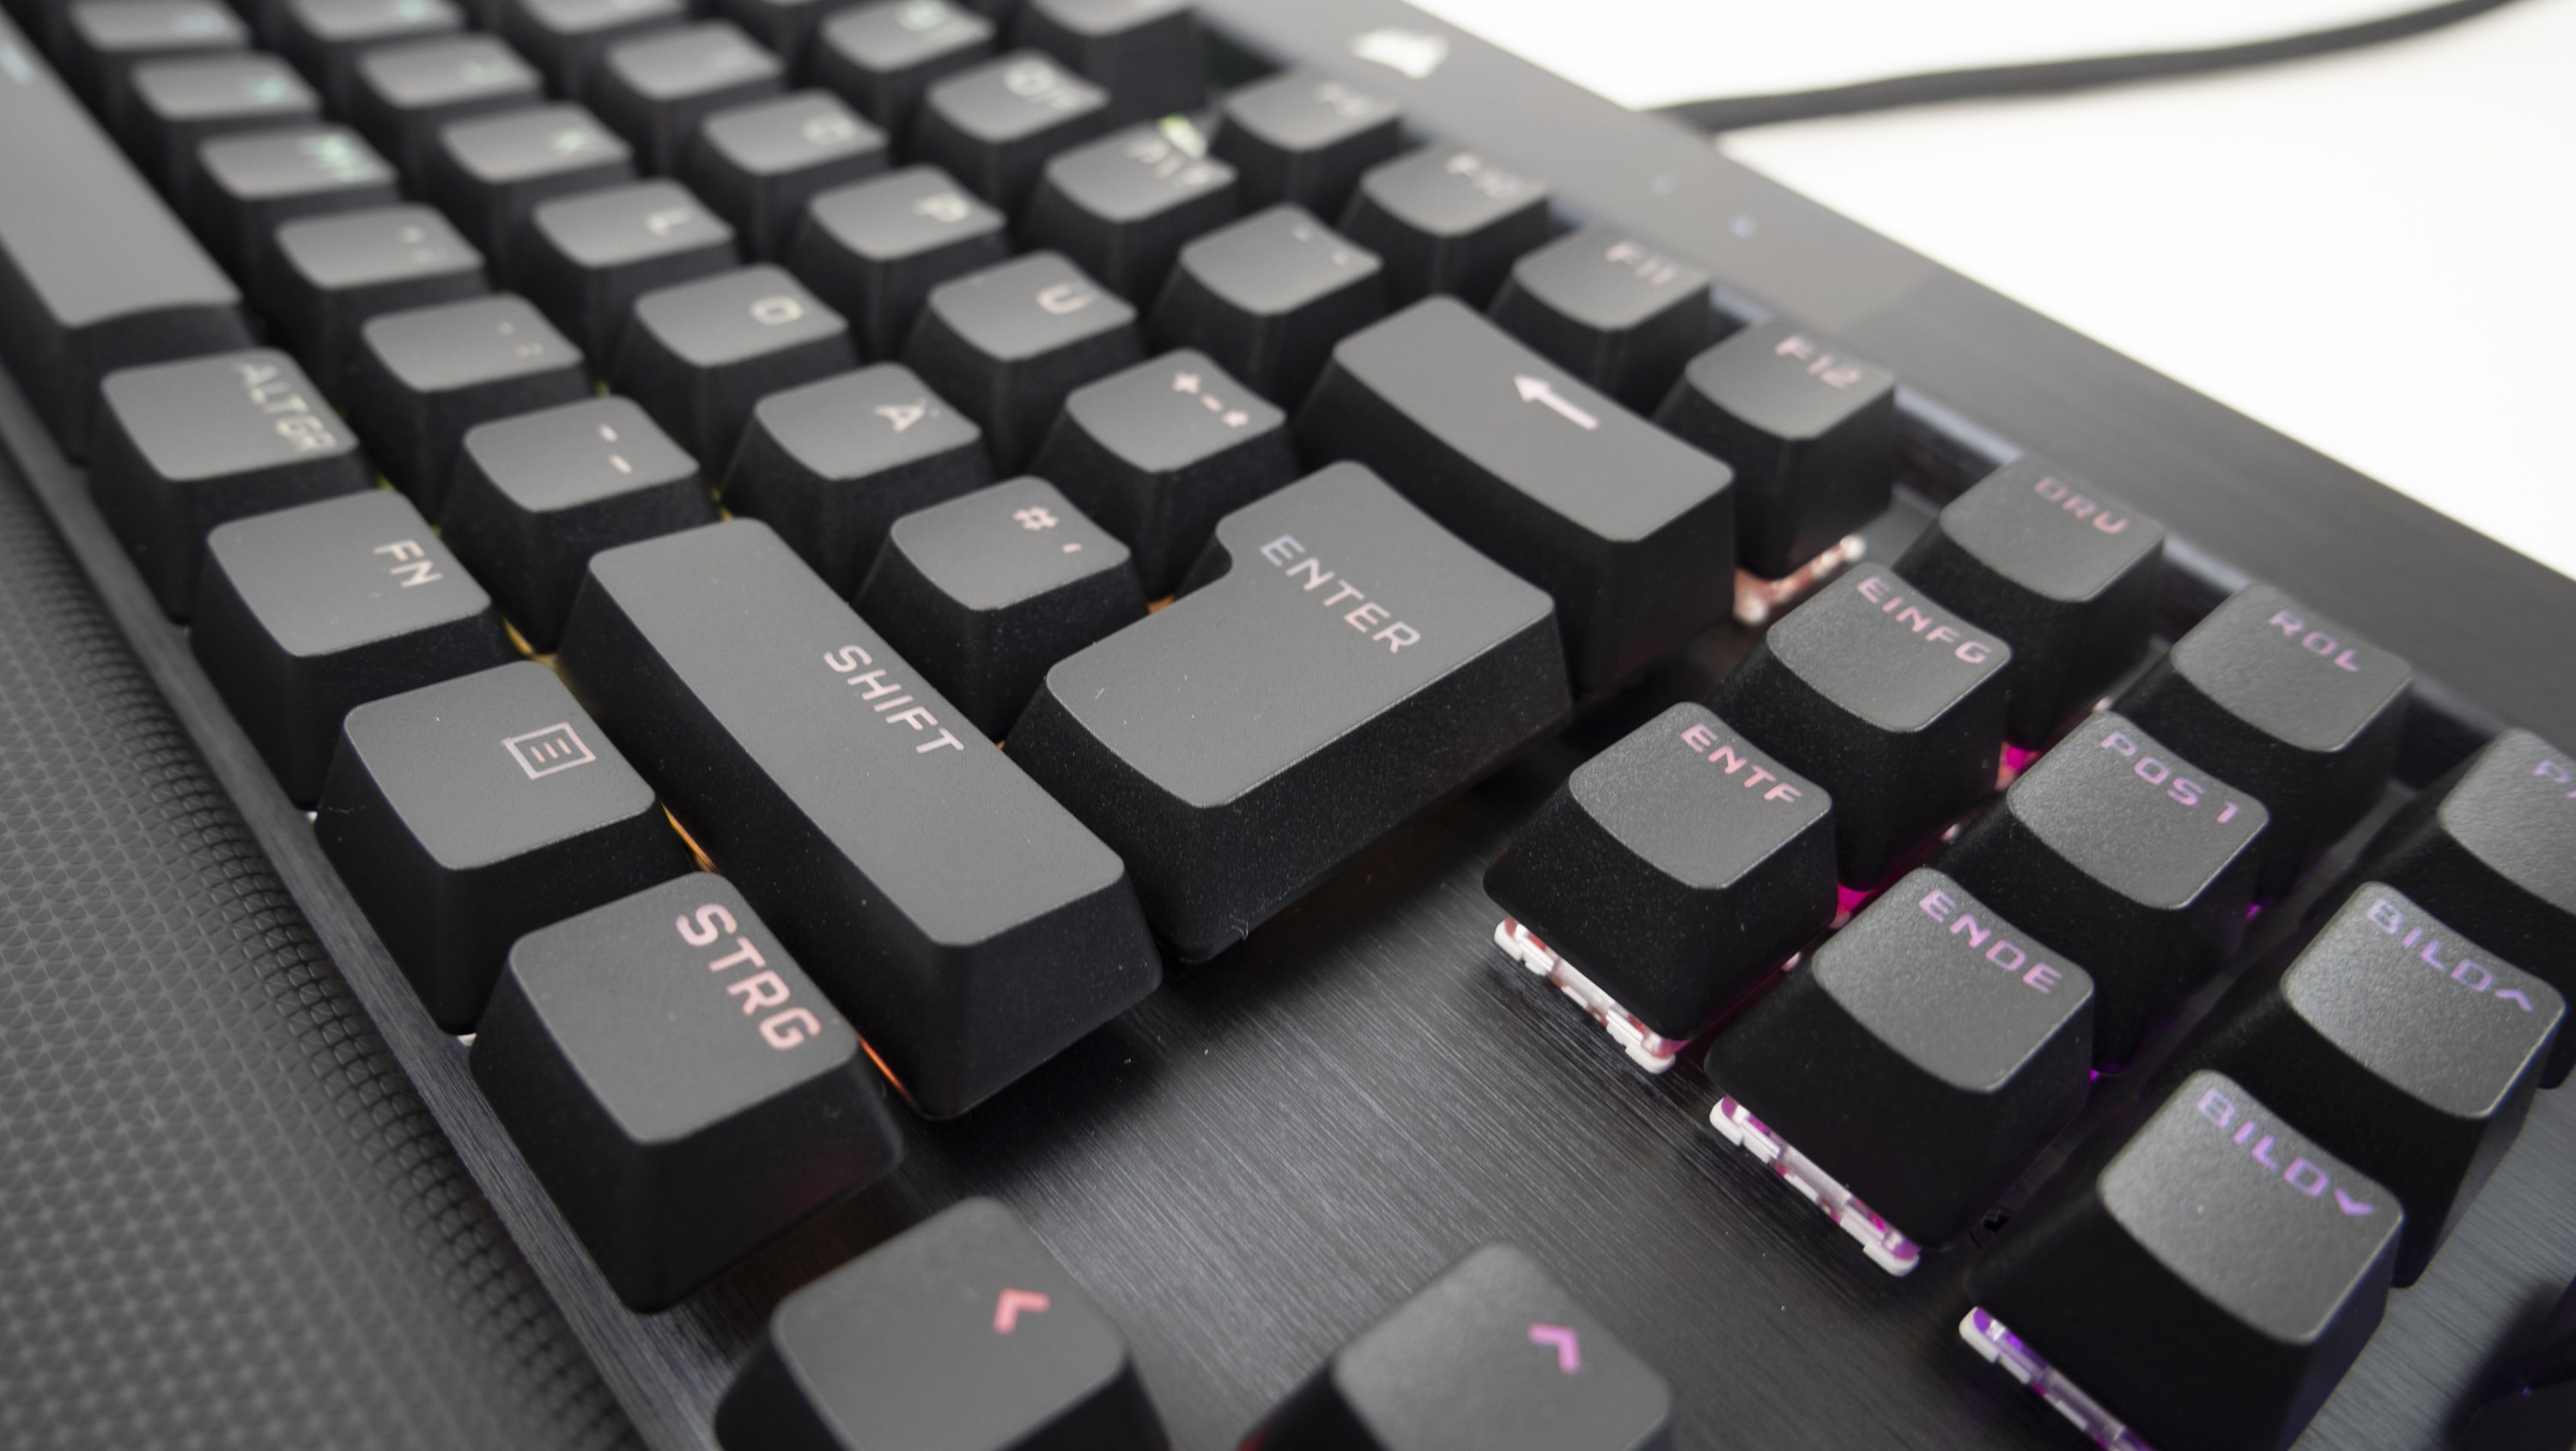 The gaming new the non ultra K100 under keyboards Corsair RGB: plus